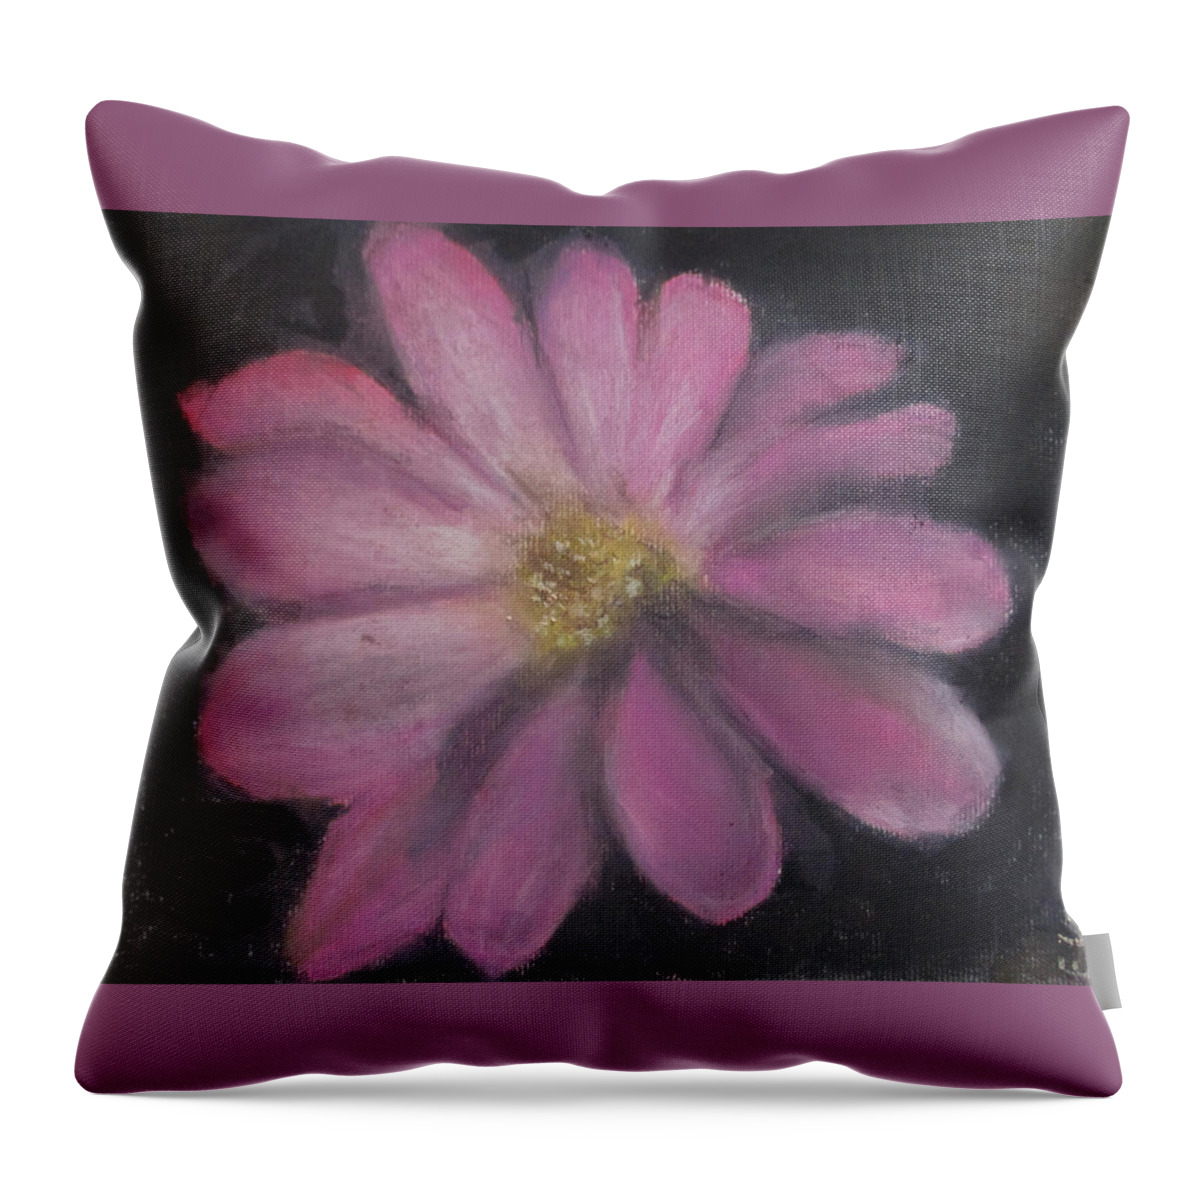 Flower Throw Pillow featuring the painting Pink Flower by Jen Shearer